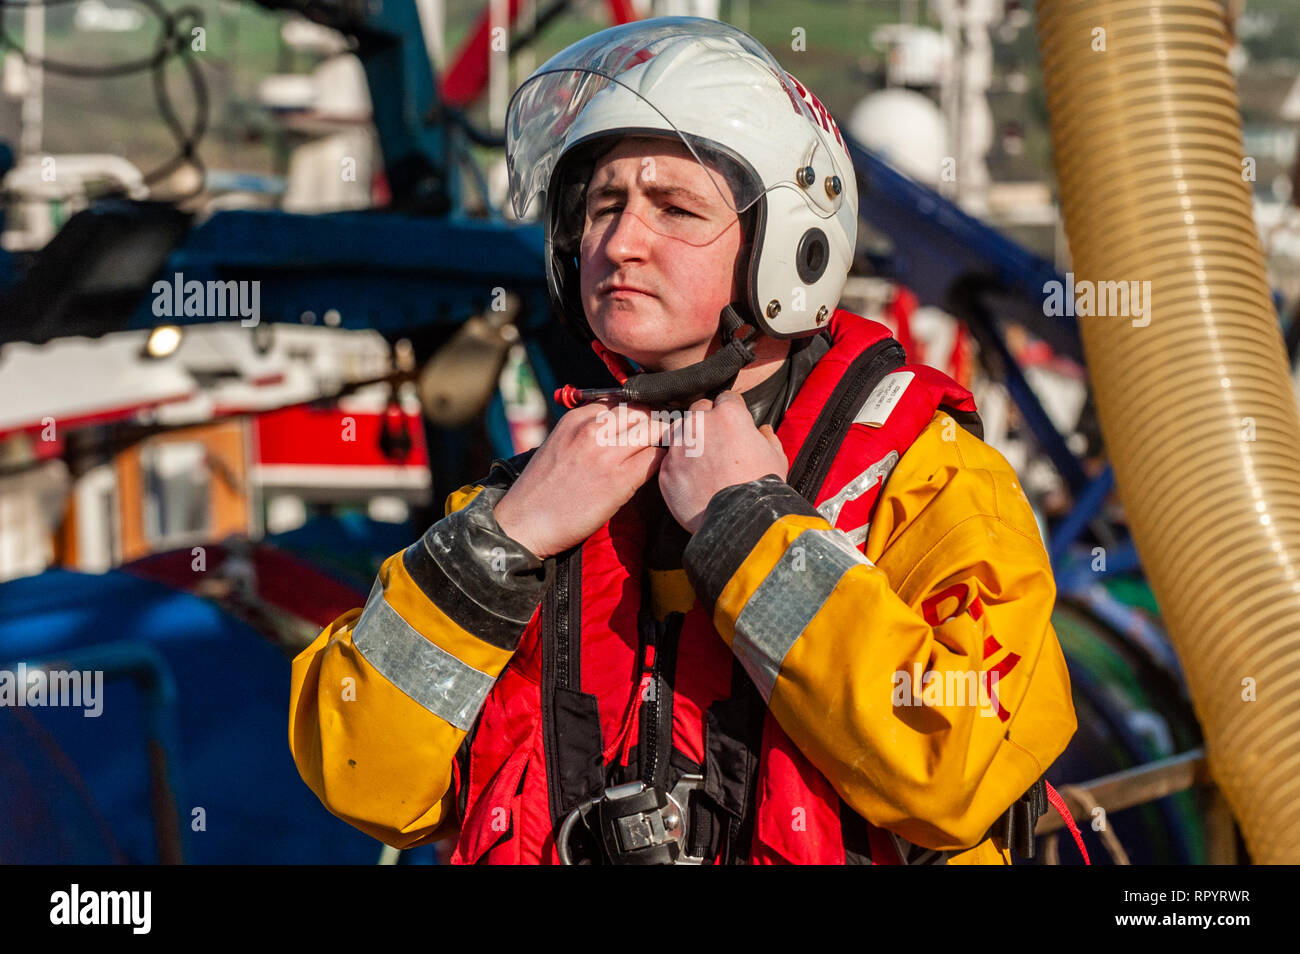 Union Hall, West Cork, Ireland. 23rd Feb, 2019. An RNLI Lifeboat crew member prepares to participate in a man overboard demonstration for the general public. The Union Hall lifeboat was called out 10 times in 2018 and once so far this year. Credit: Andy Gibson/Alamy Live News. Stock Photo